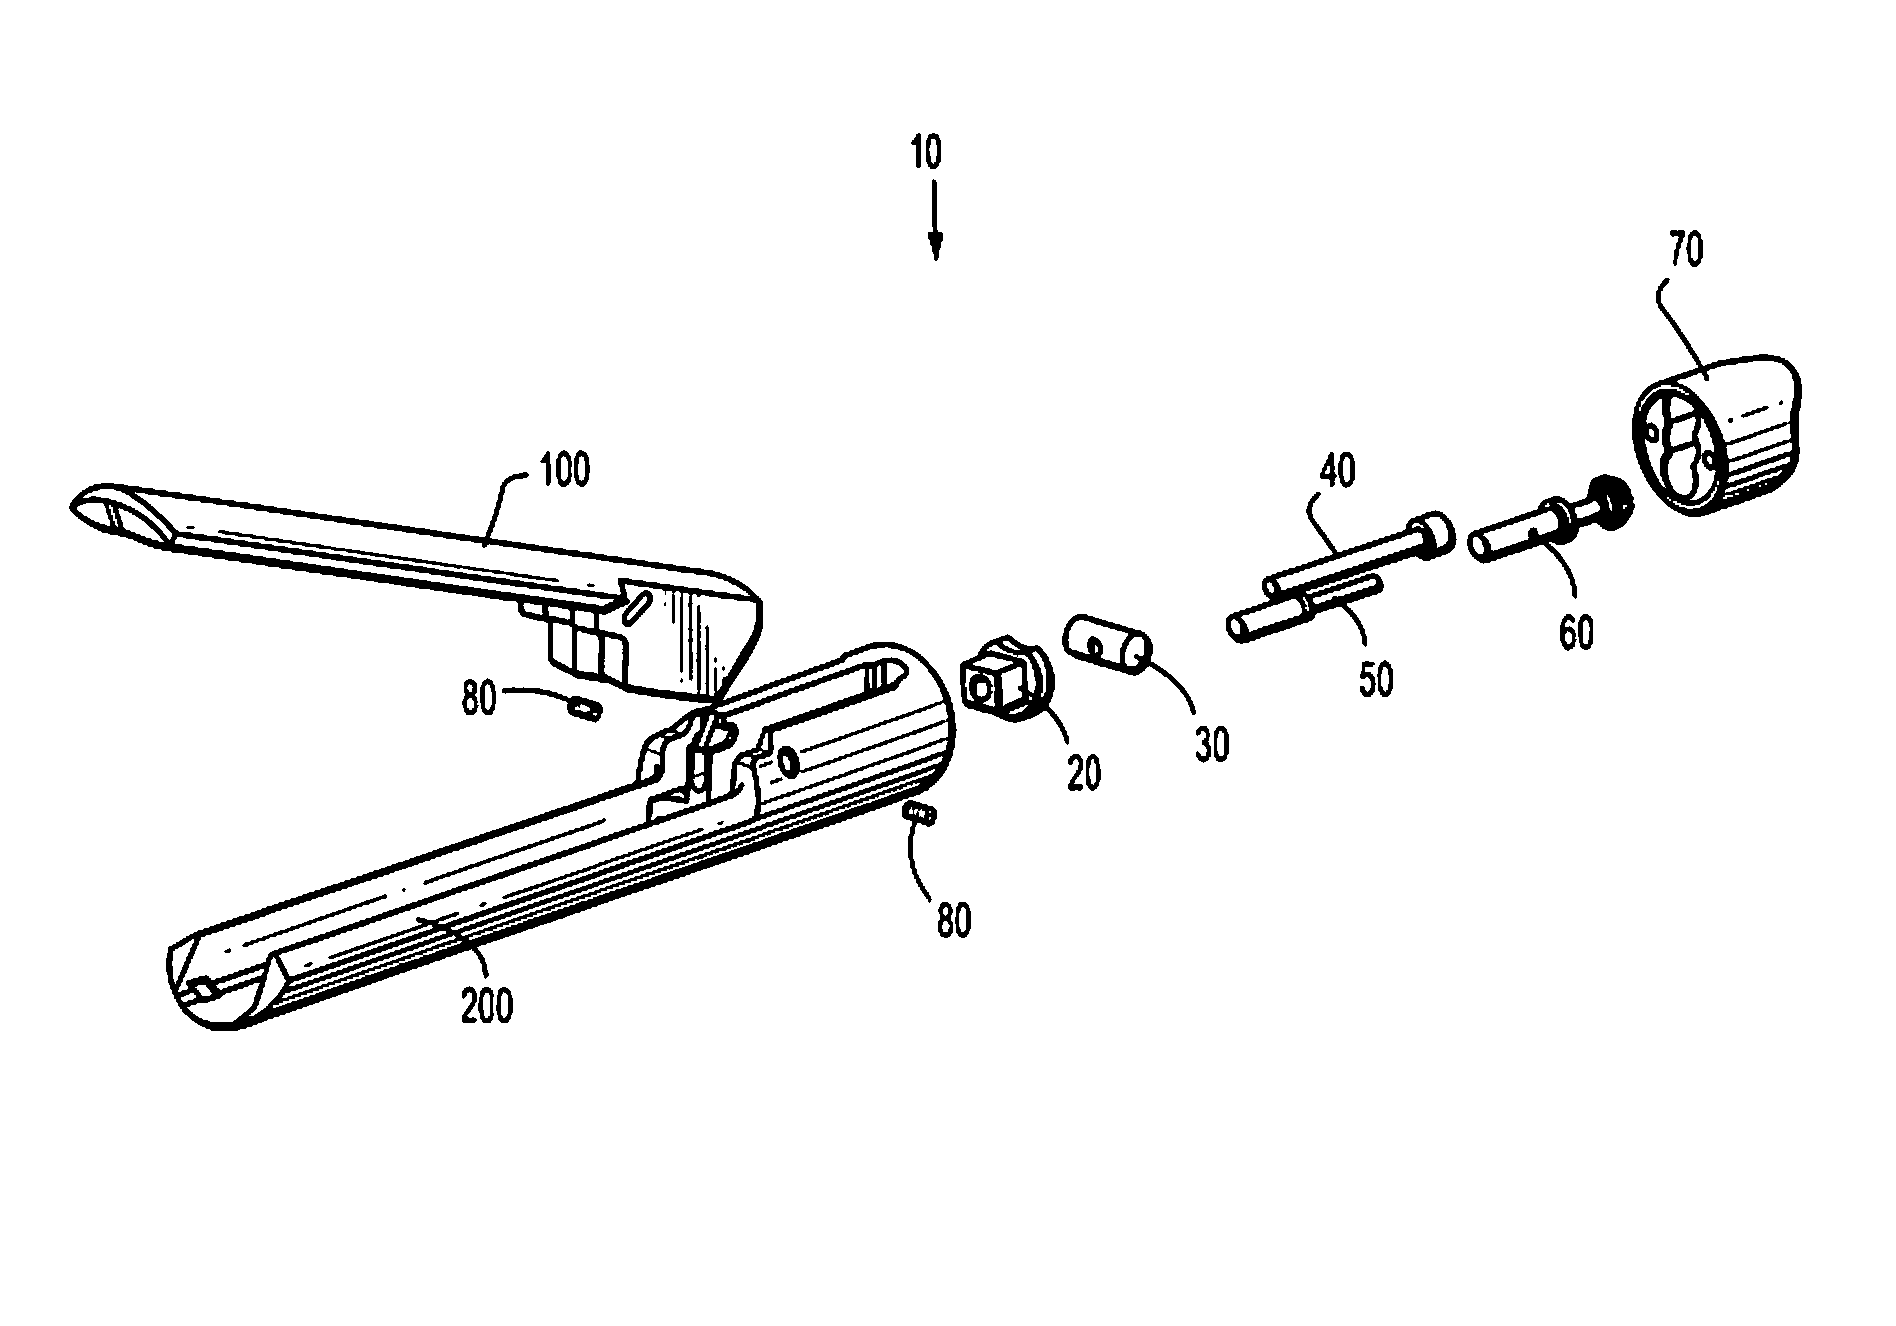 Surgical stapling device with captive anvil